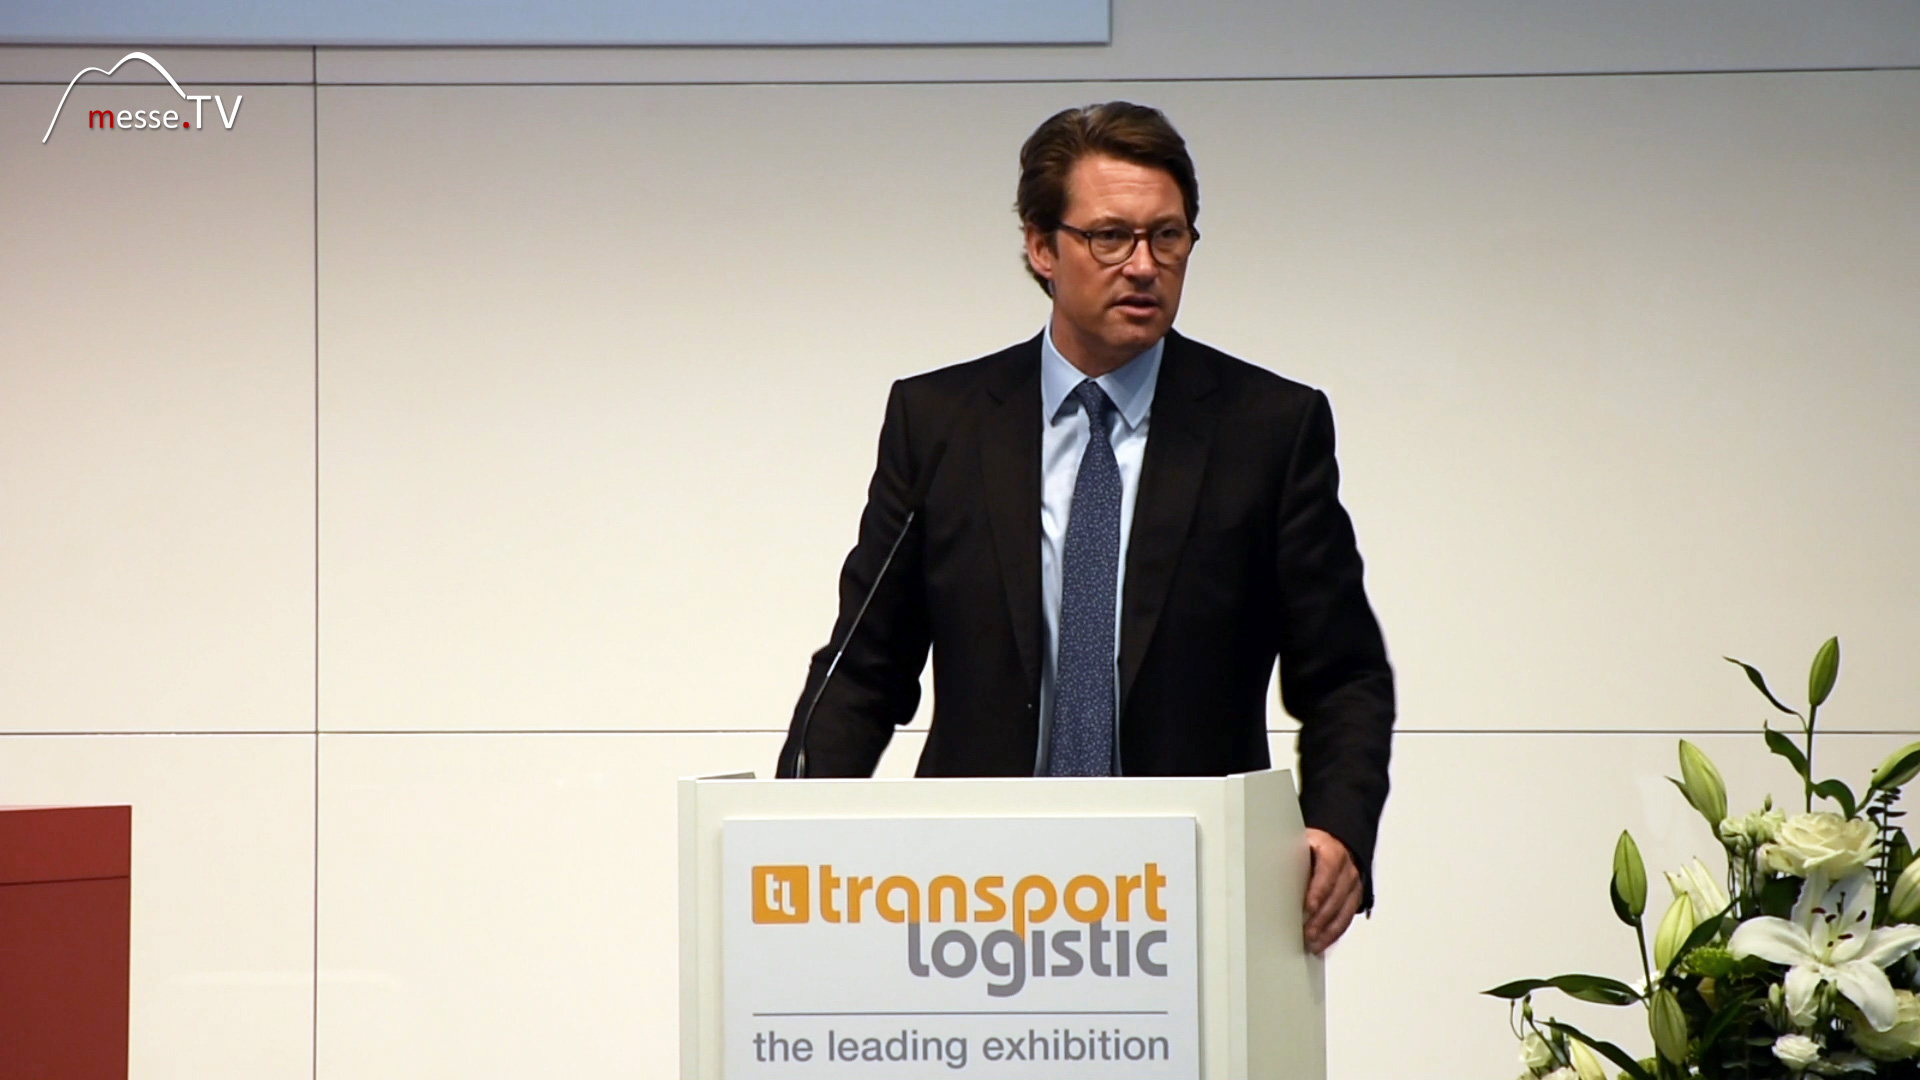 Andreas Scheuer Federal Minister for Transport and Digital Infrastructure transport logistic 2019